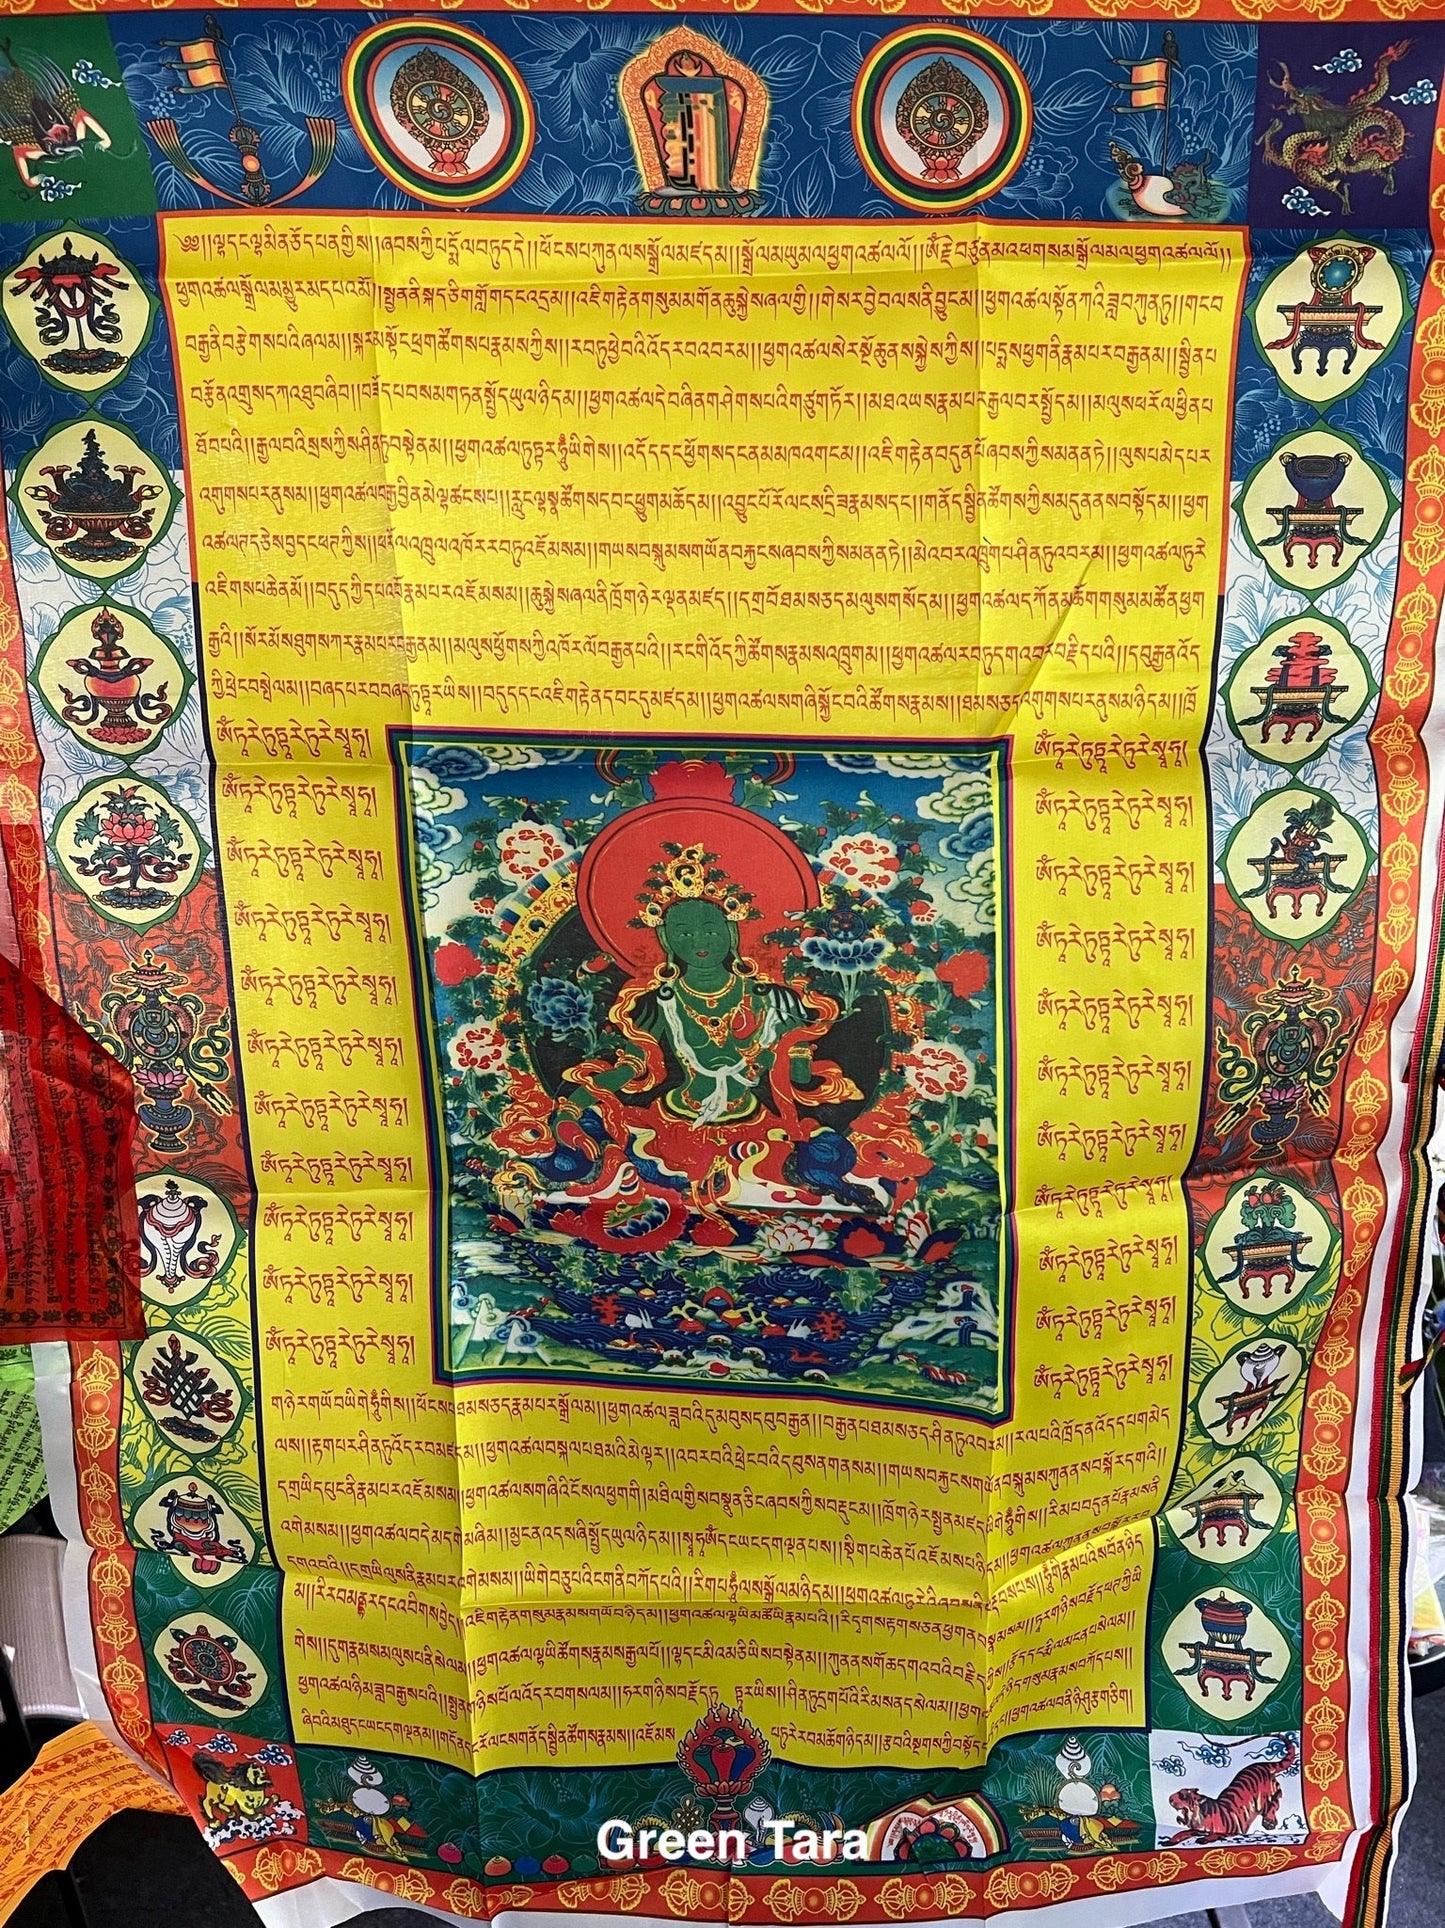 Green Tara Tibetan Prayer Banner: High-quality poly silk flag imprinted with the revered female Buddha Green Tara. Measures 27x39 inches, suitable for hanging on a pole or a wall